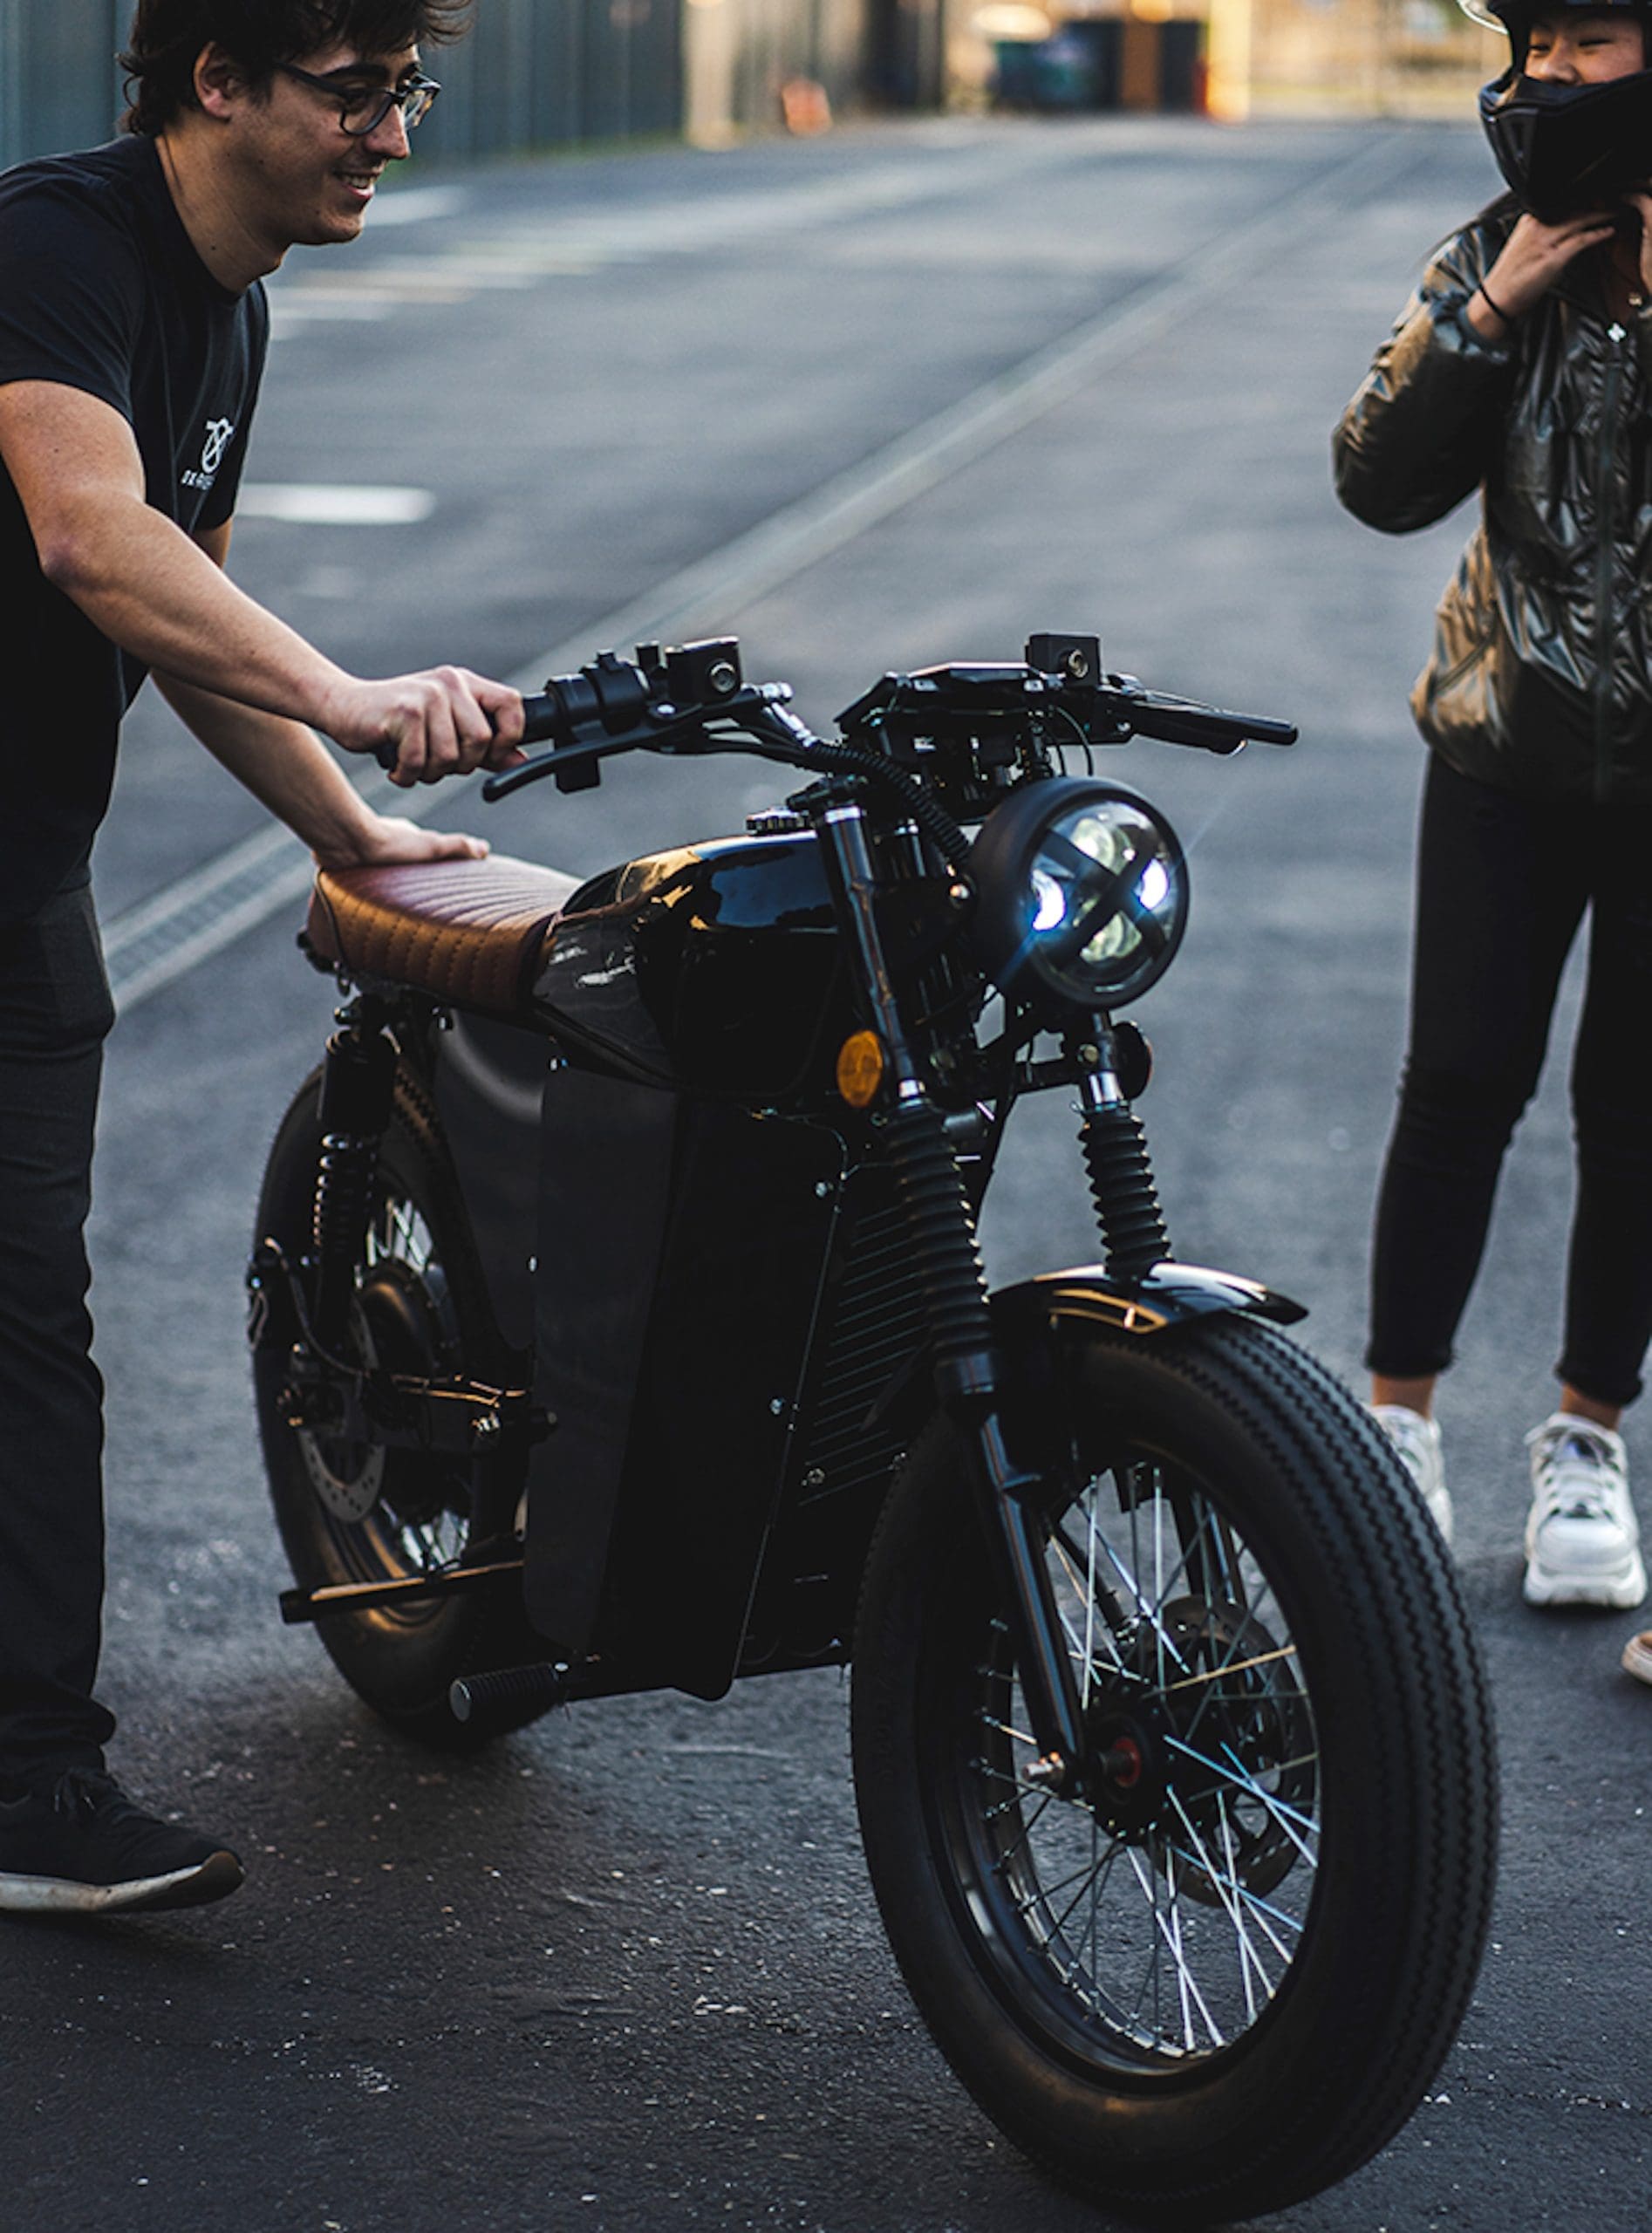 The all-electric OX ONE motorcycle. Media sourced by the PACK.